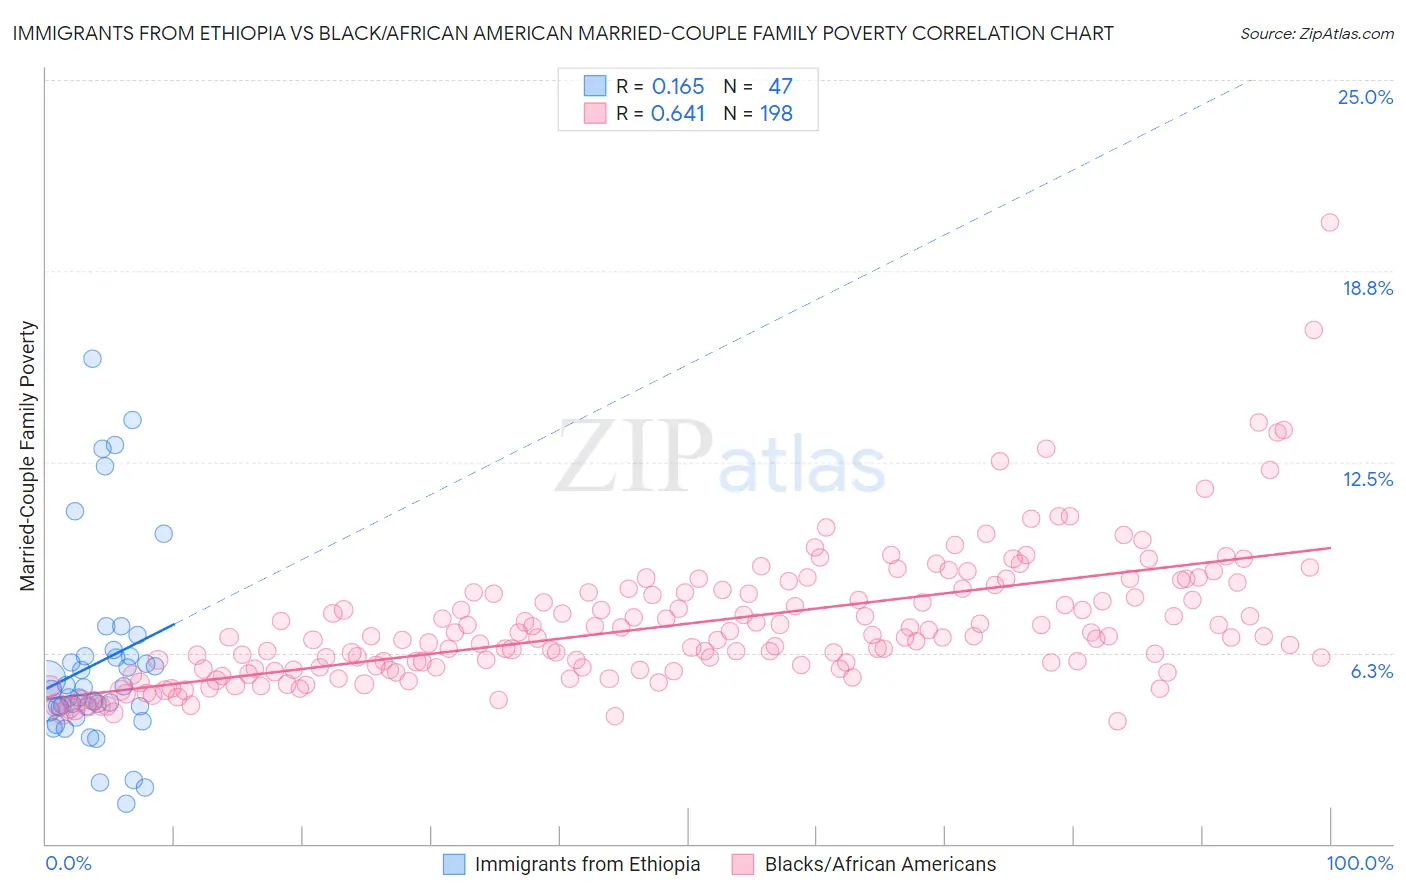 Immigrants from Ethiopia vs Black/African American Married-Couple Family Poverty